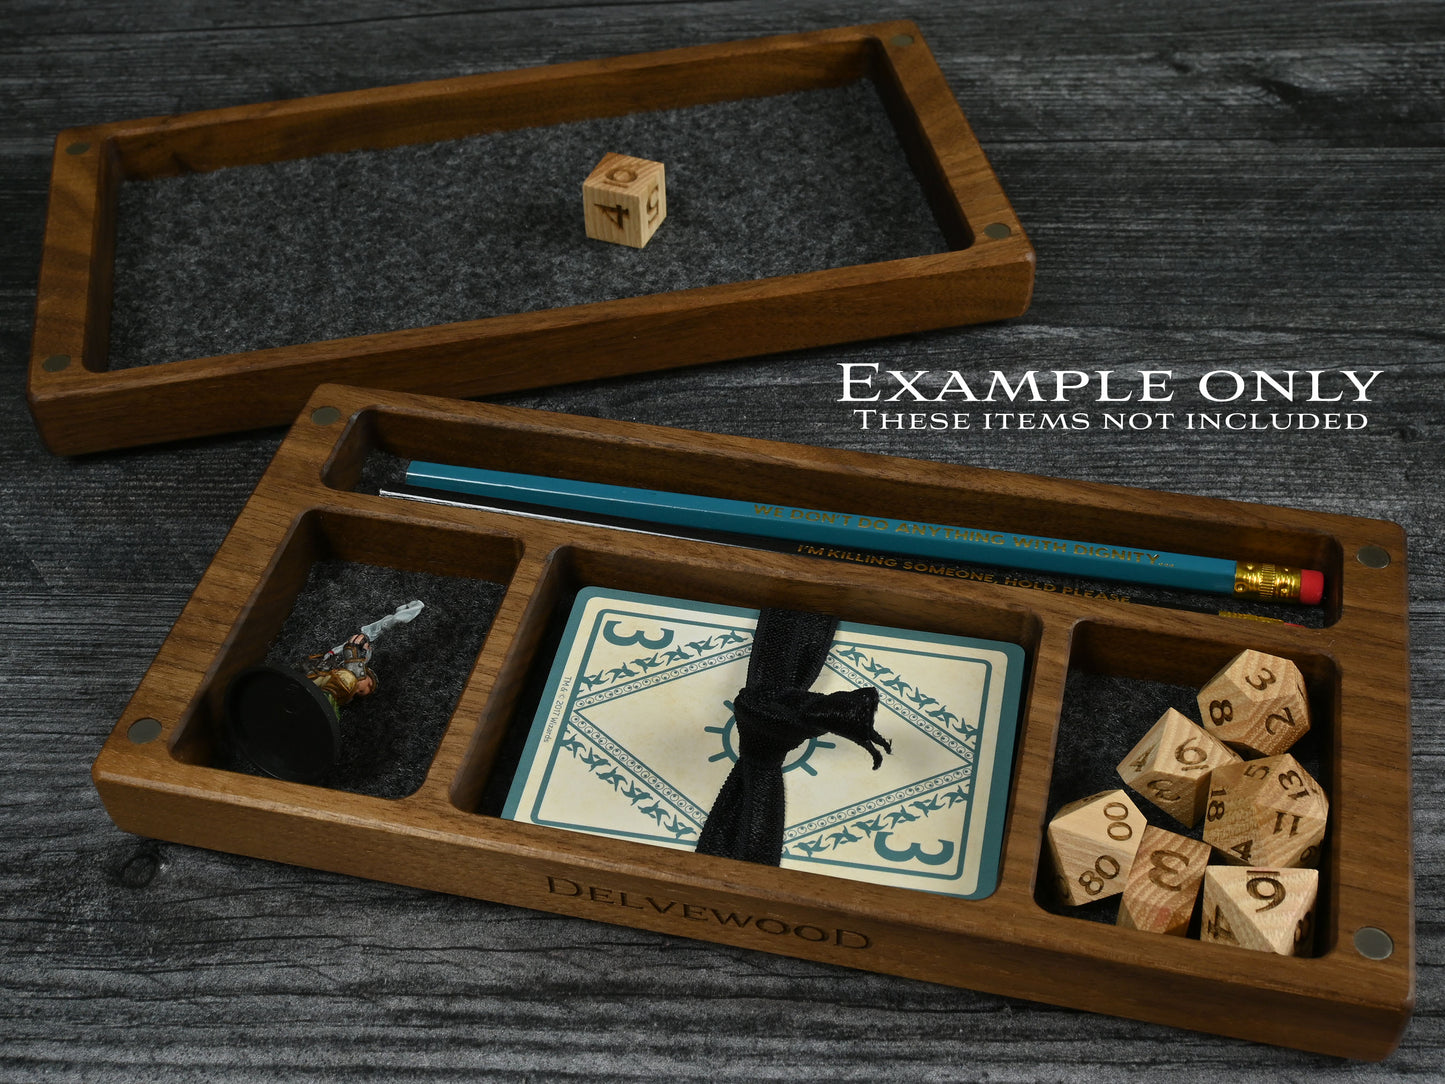 Sycamore - Delver's Kit Dice Box and Tray